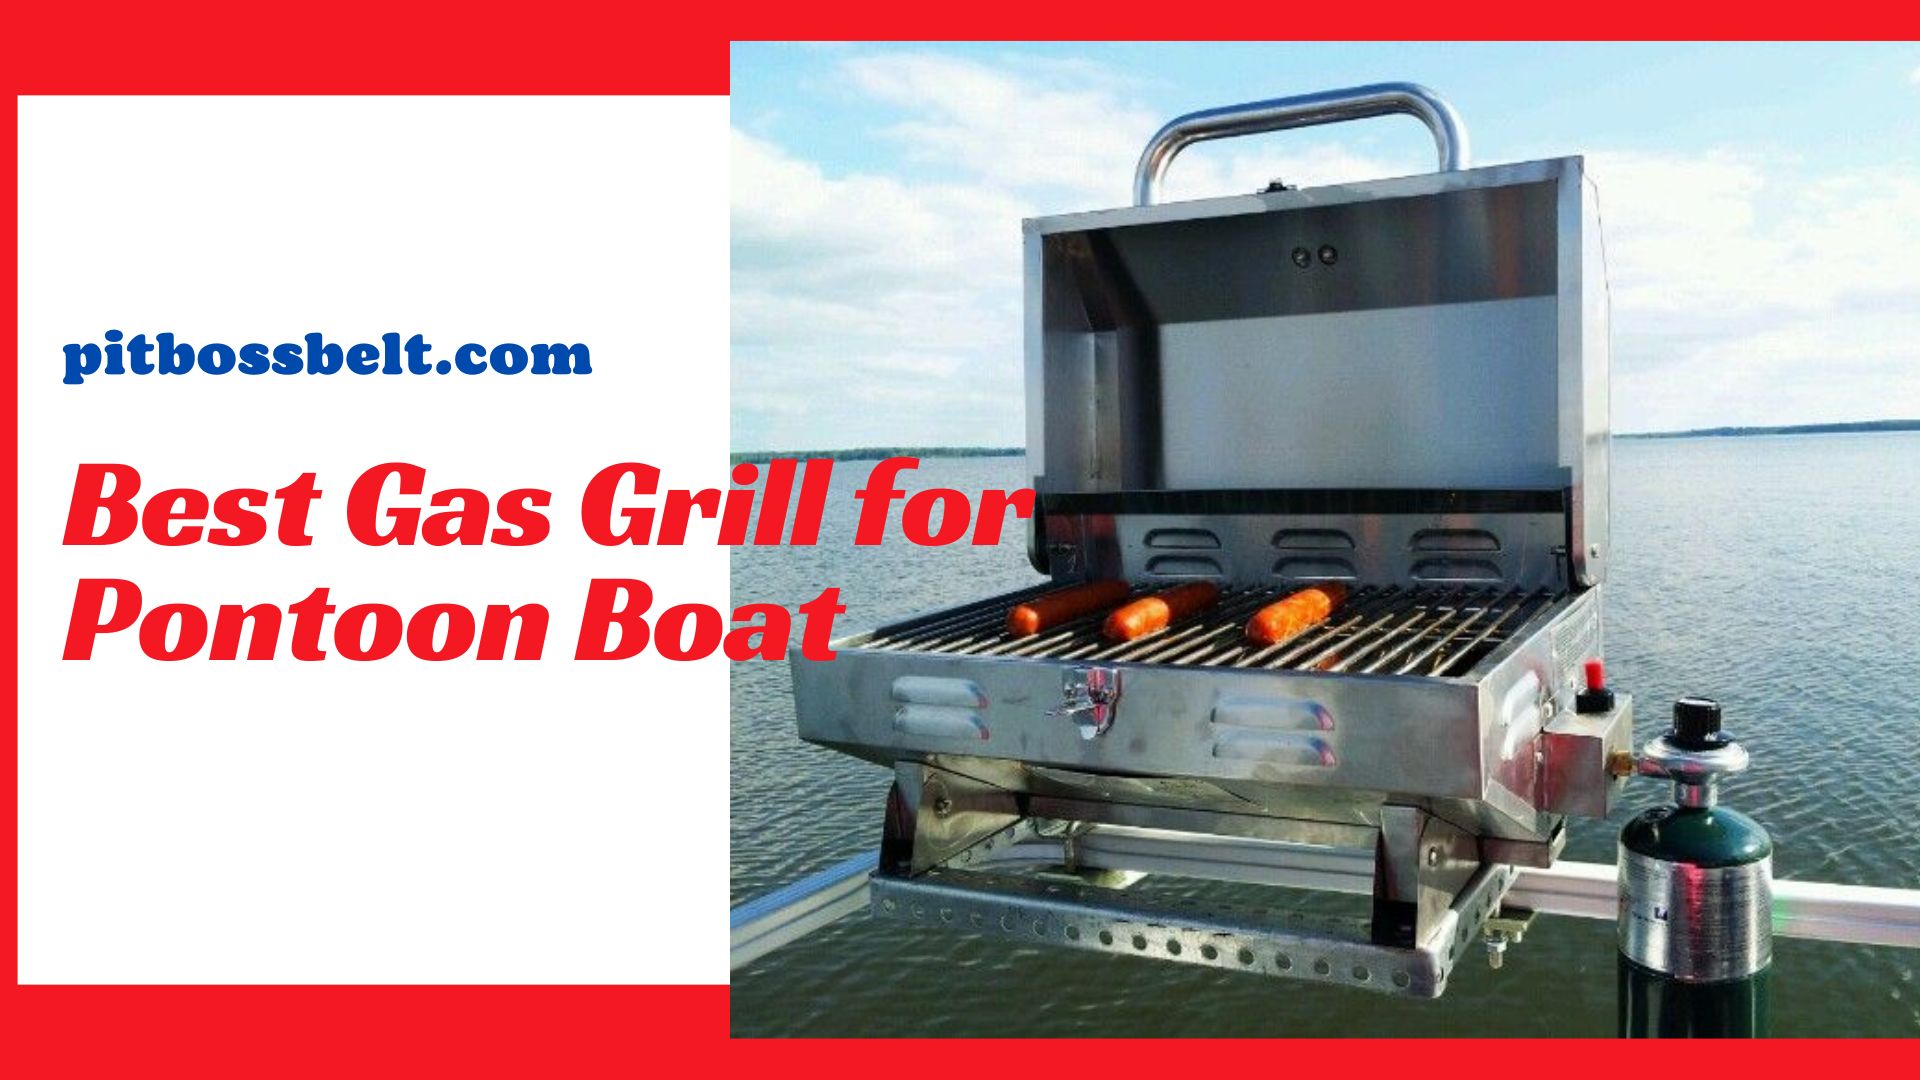 Best-Gas-Grill-for-Pontoon-Boat